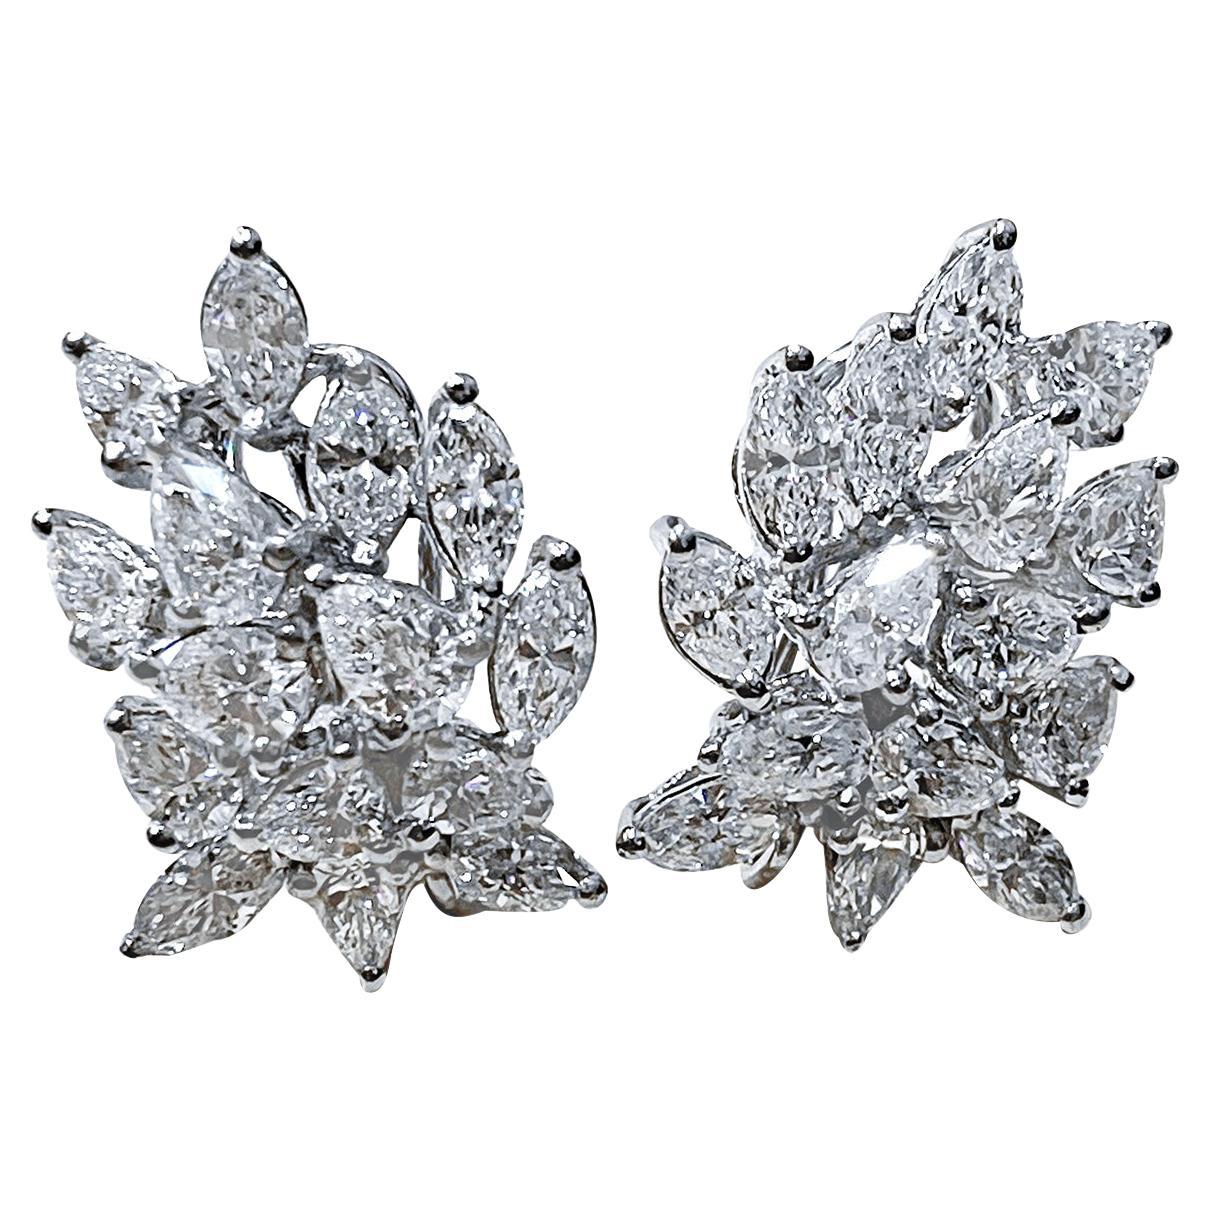 1960's Platinum And Diamond earrings 
weight of platinum 24.6 Gm
15  diamonds in each earring 
Total 30 diamonds.
There are Marquise shape diamonds and Pear shape diamonds.
 Total weight of the d1amonds is approximately weight 20 Ct

total weight of